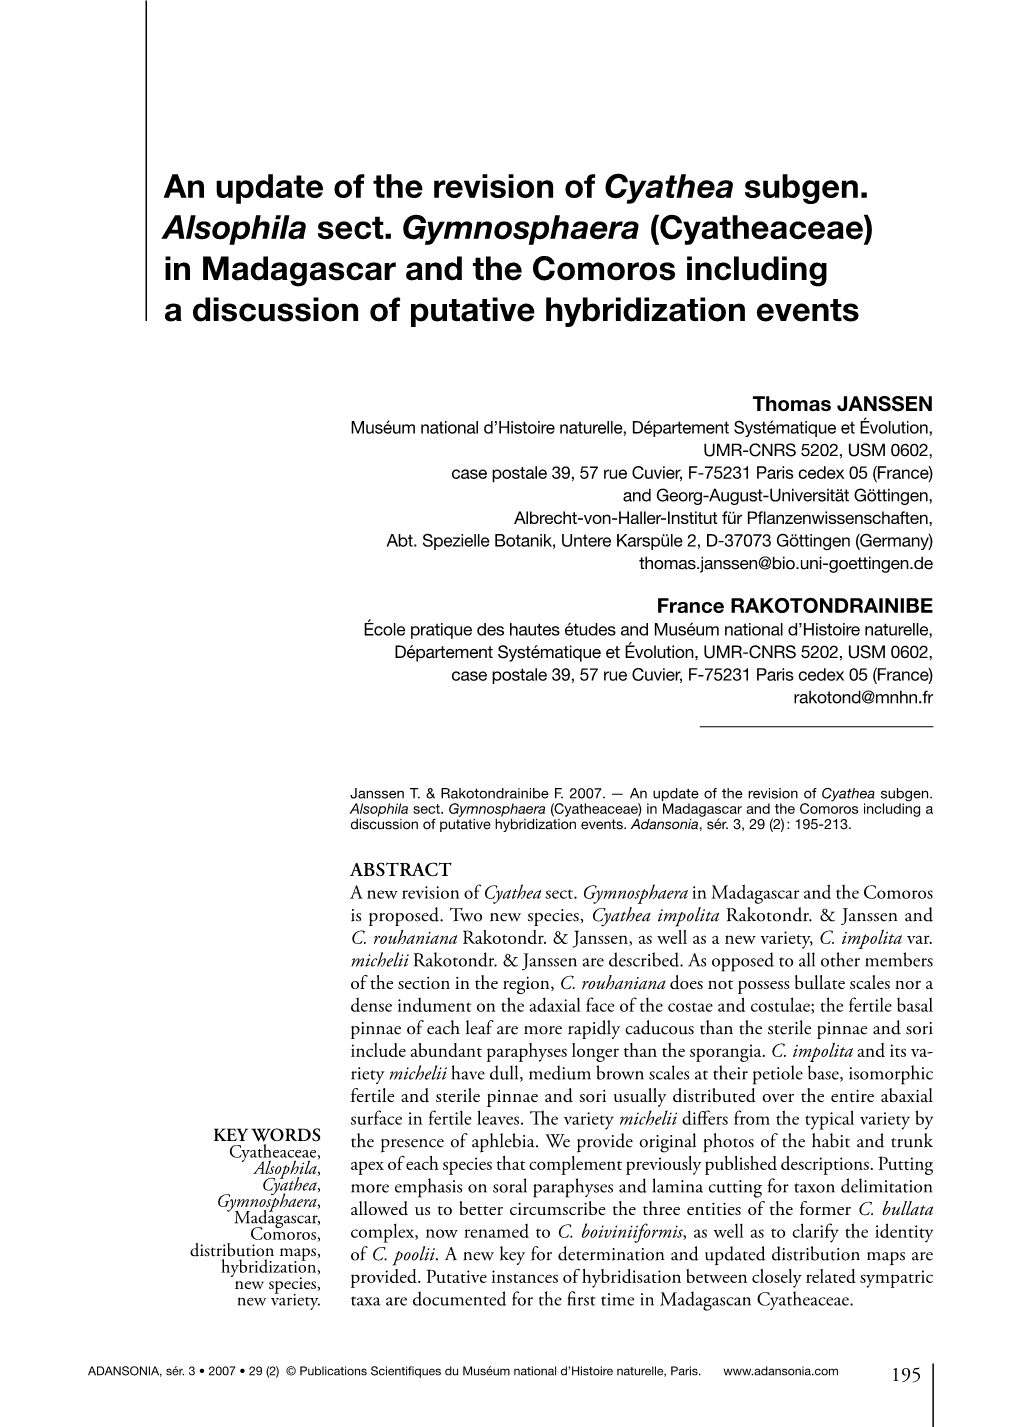 An Update of the Revision of Cyathea Subgen. Alsophila Sect